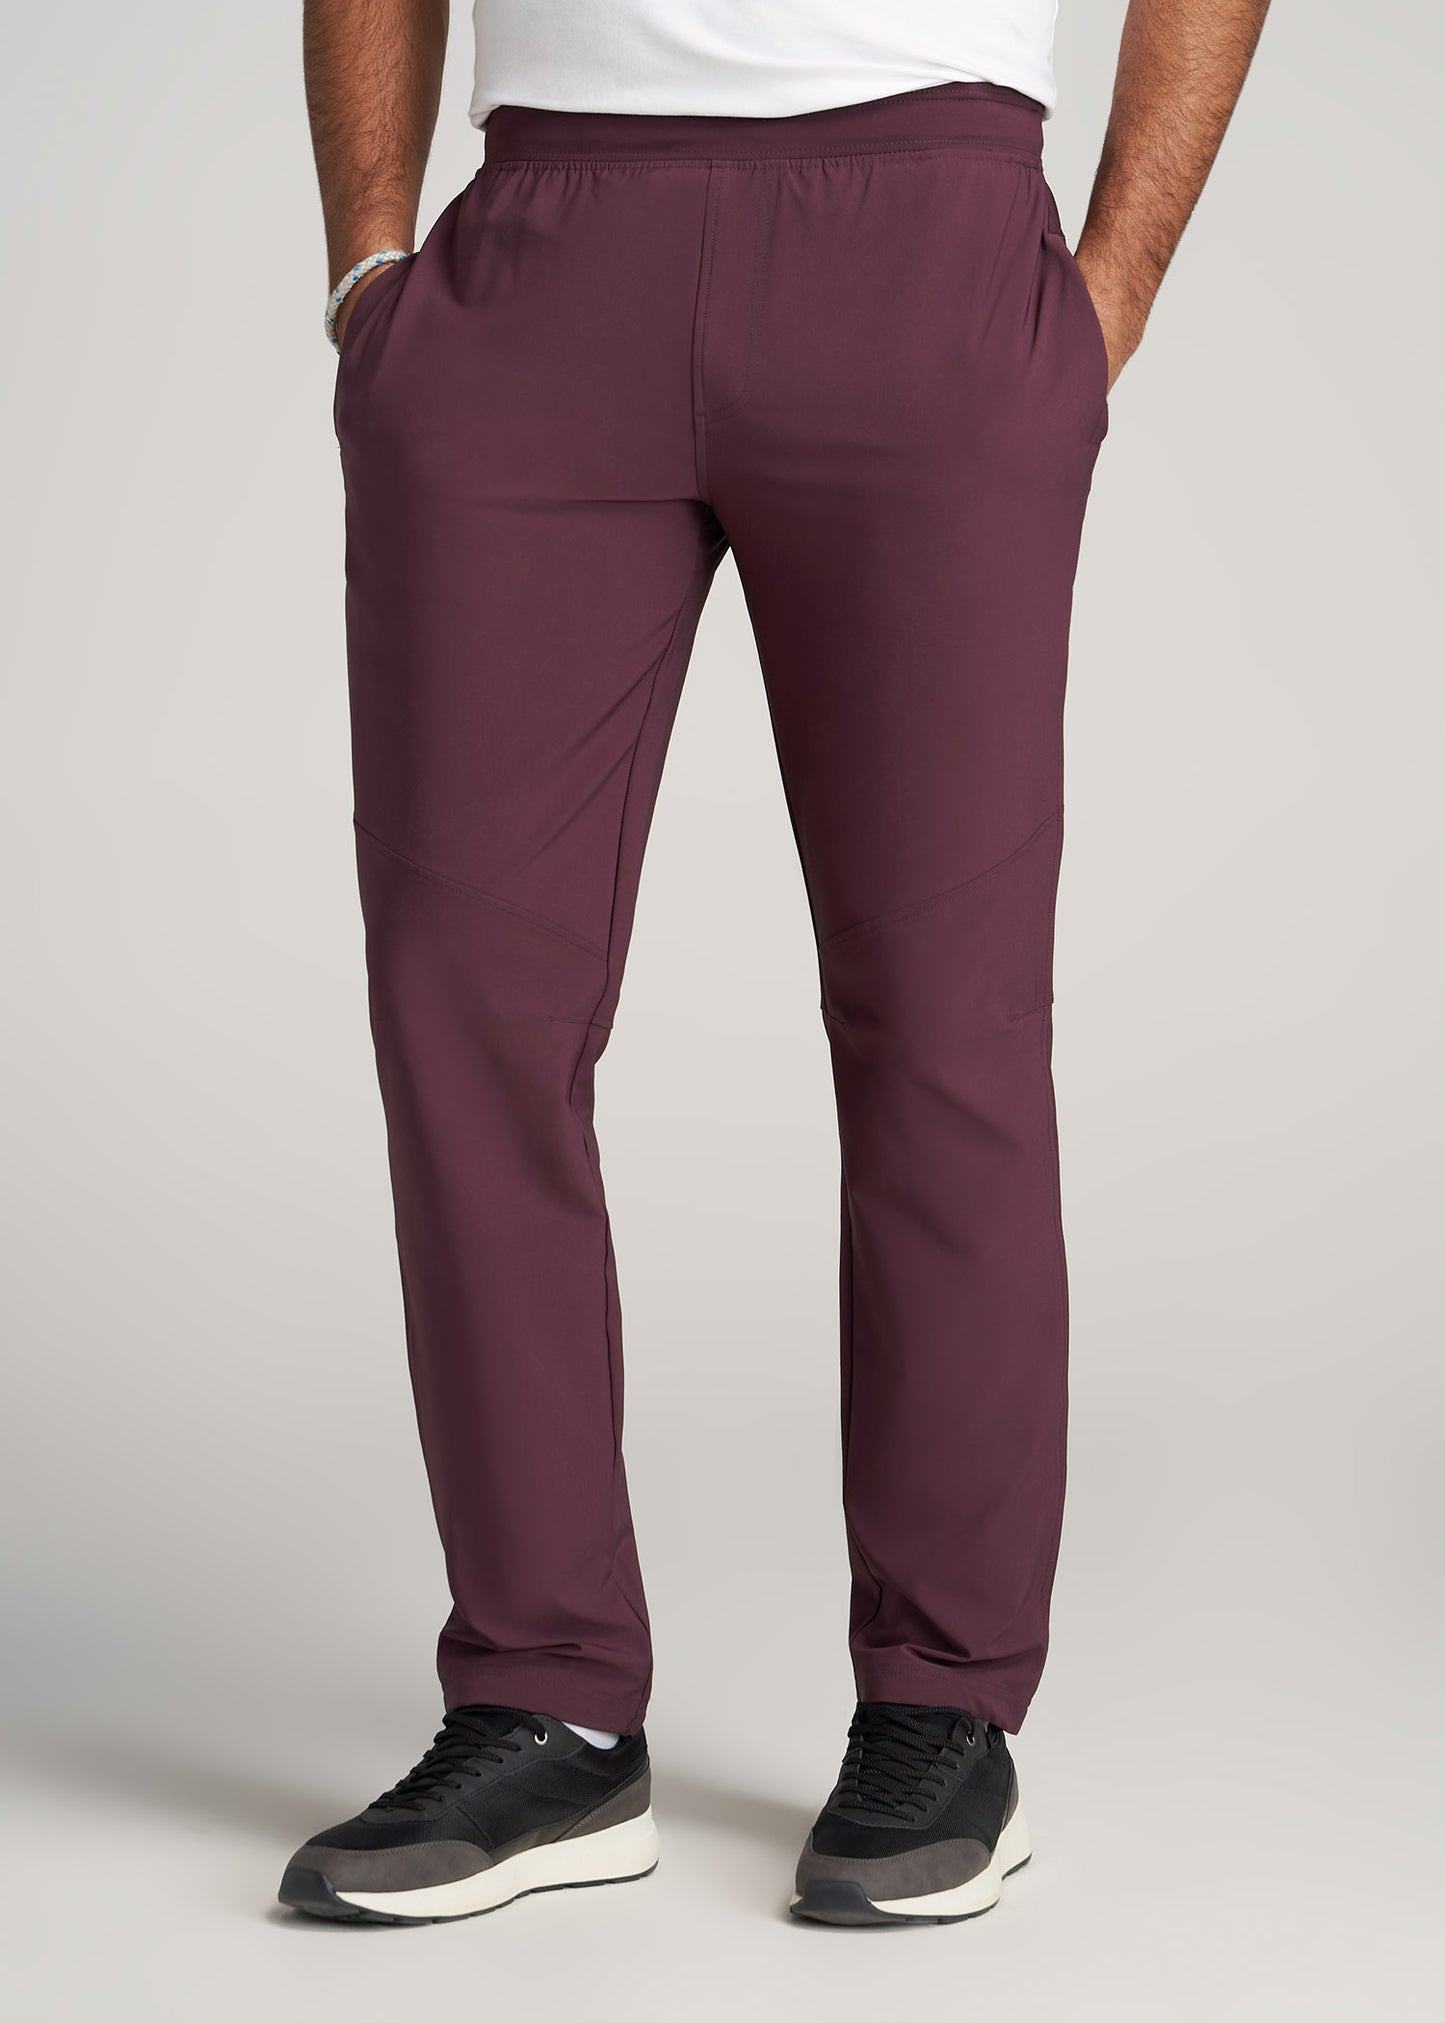 Men's Tall Stretch Woven Training Pant in Maroon